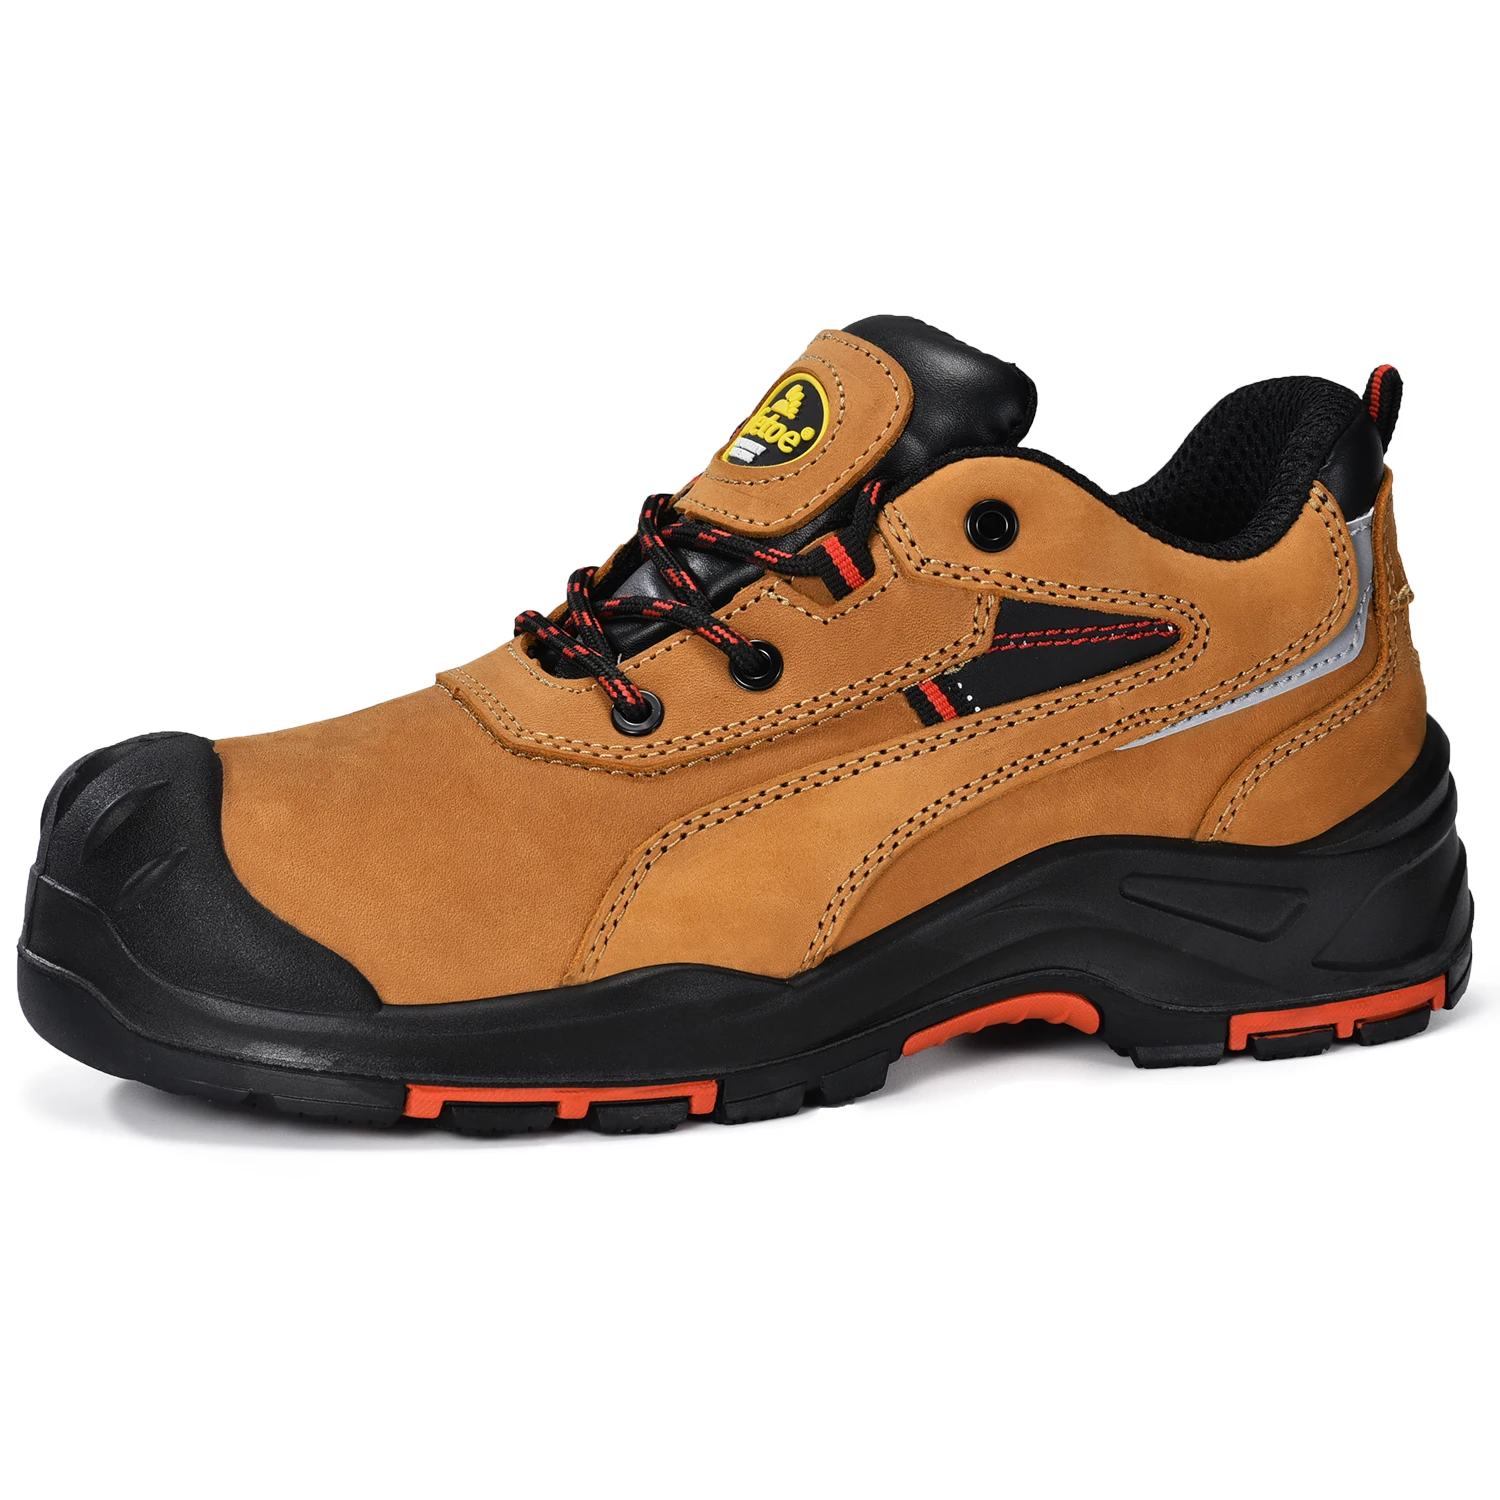 

L-7510 Safety Shoes, Anti-Static, Waterproof, Breathable Leather, Comfortable Insole, Composite Toe Overcap, Kevlar Plate